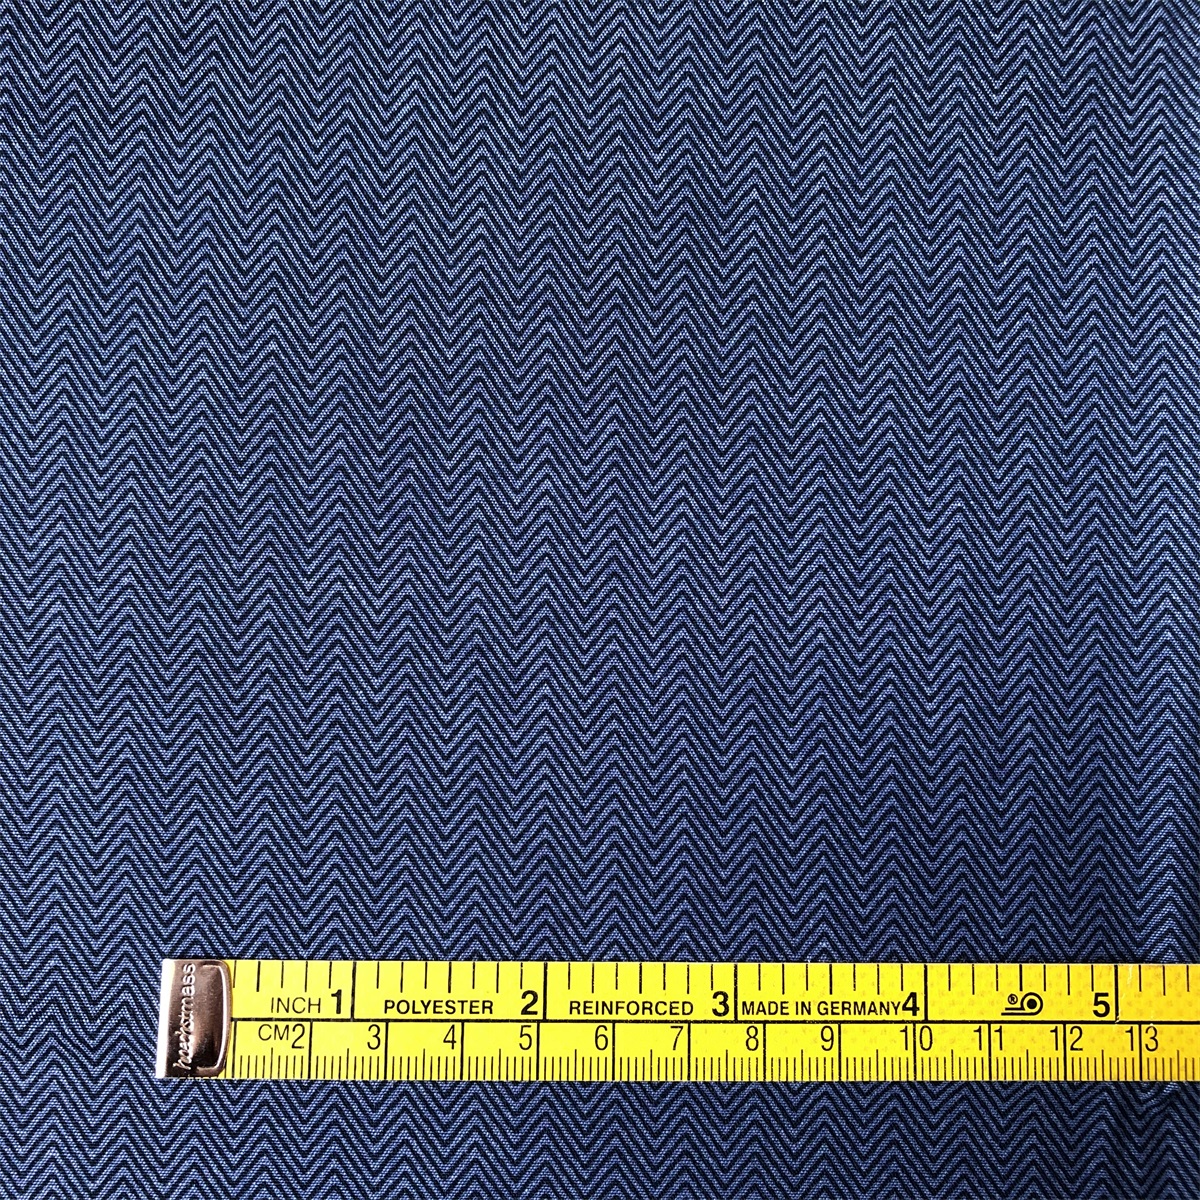 High quality Eco-friendly Cotton Fabric for men's shirts 100% cotton printed on yarn dyed chambray plain woven shirts fabric